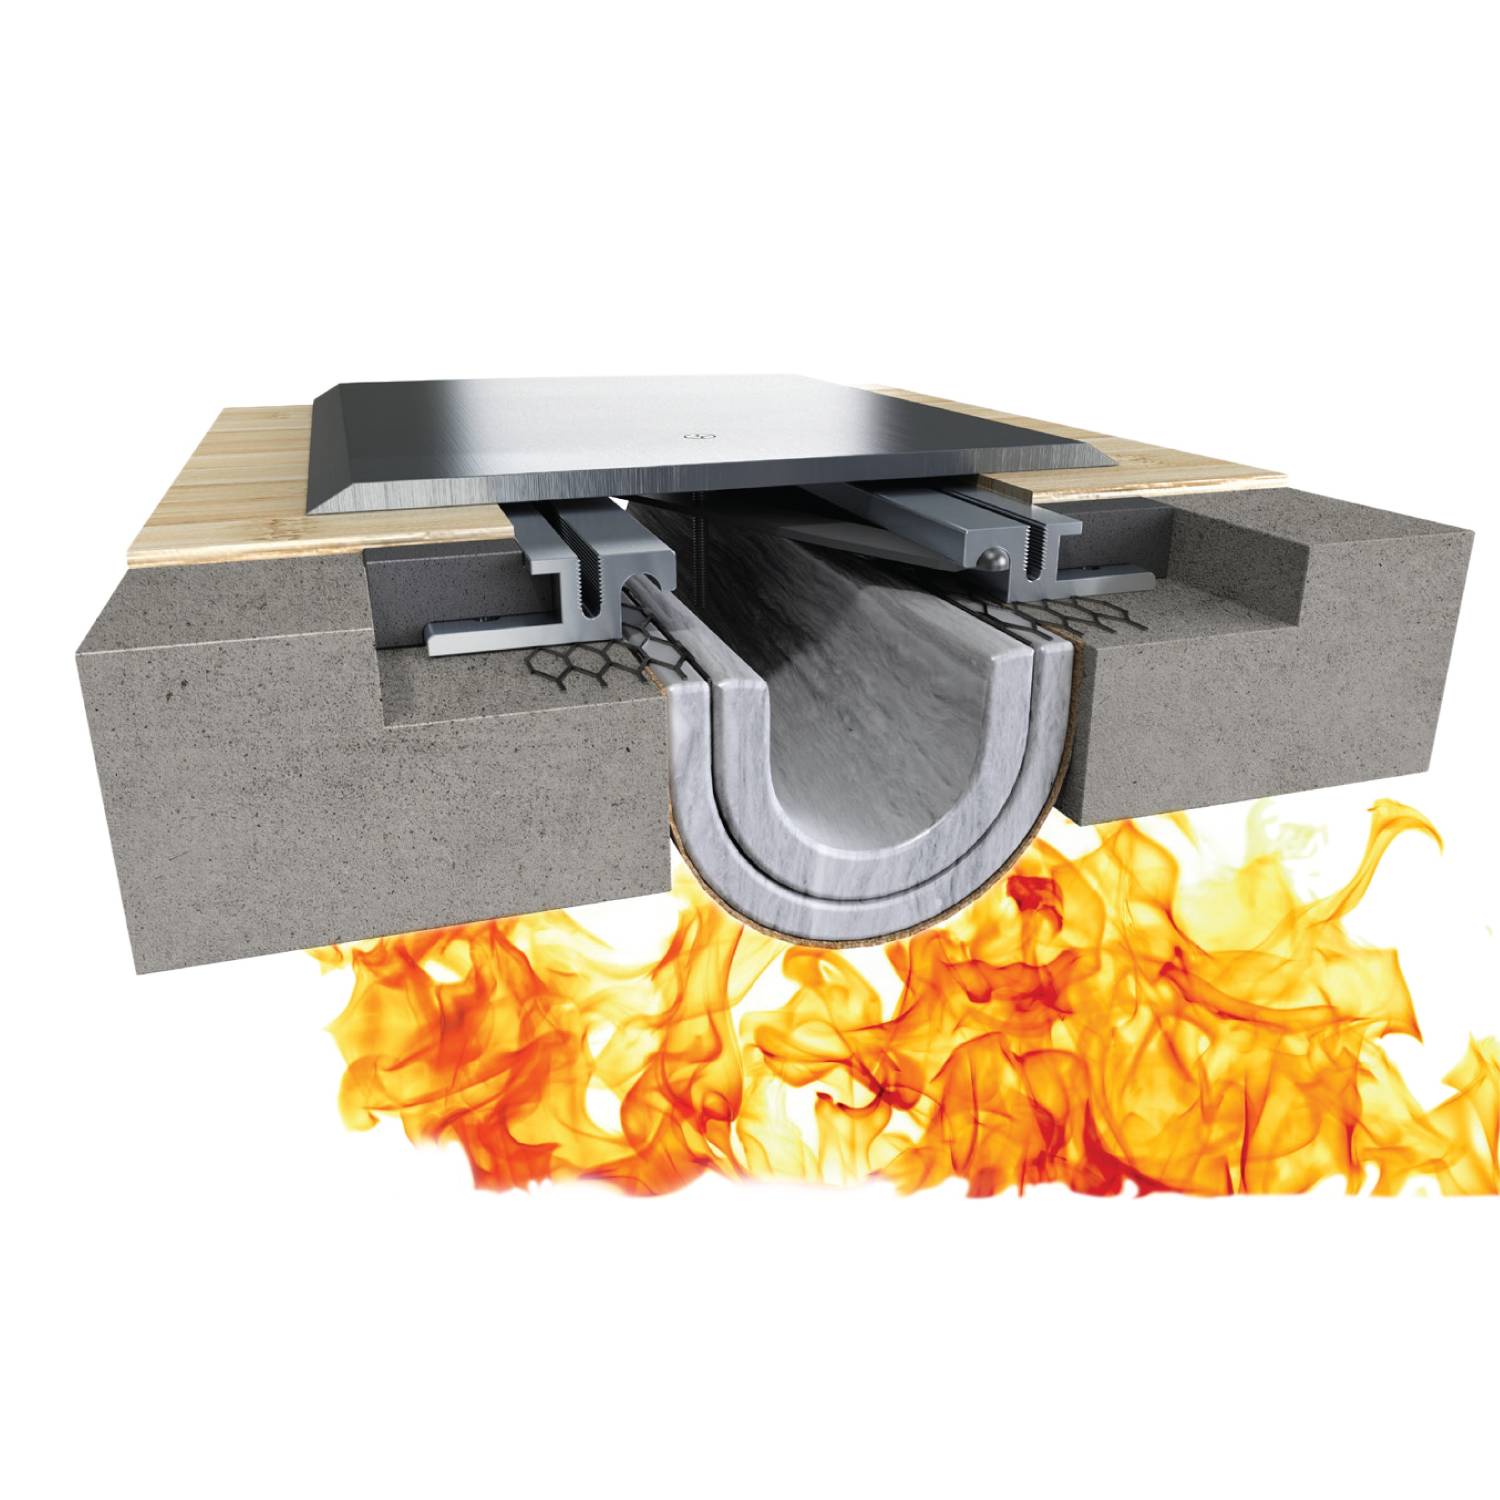 Fireline™ 520 Fire Blanket Expansion Joint System - Inside Mount, Floor to Floor and Wall to Wall